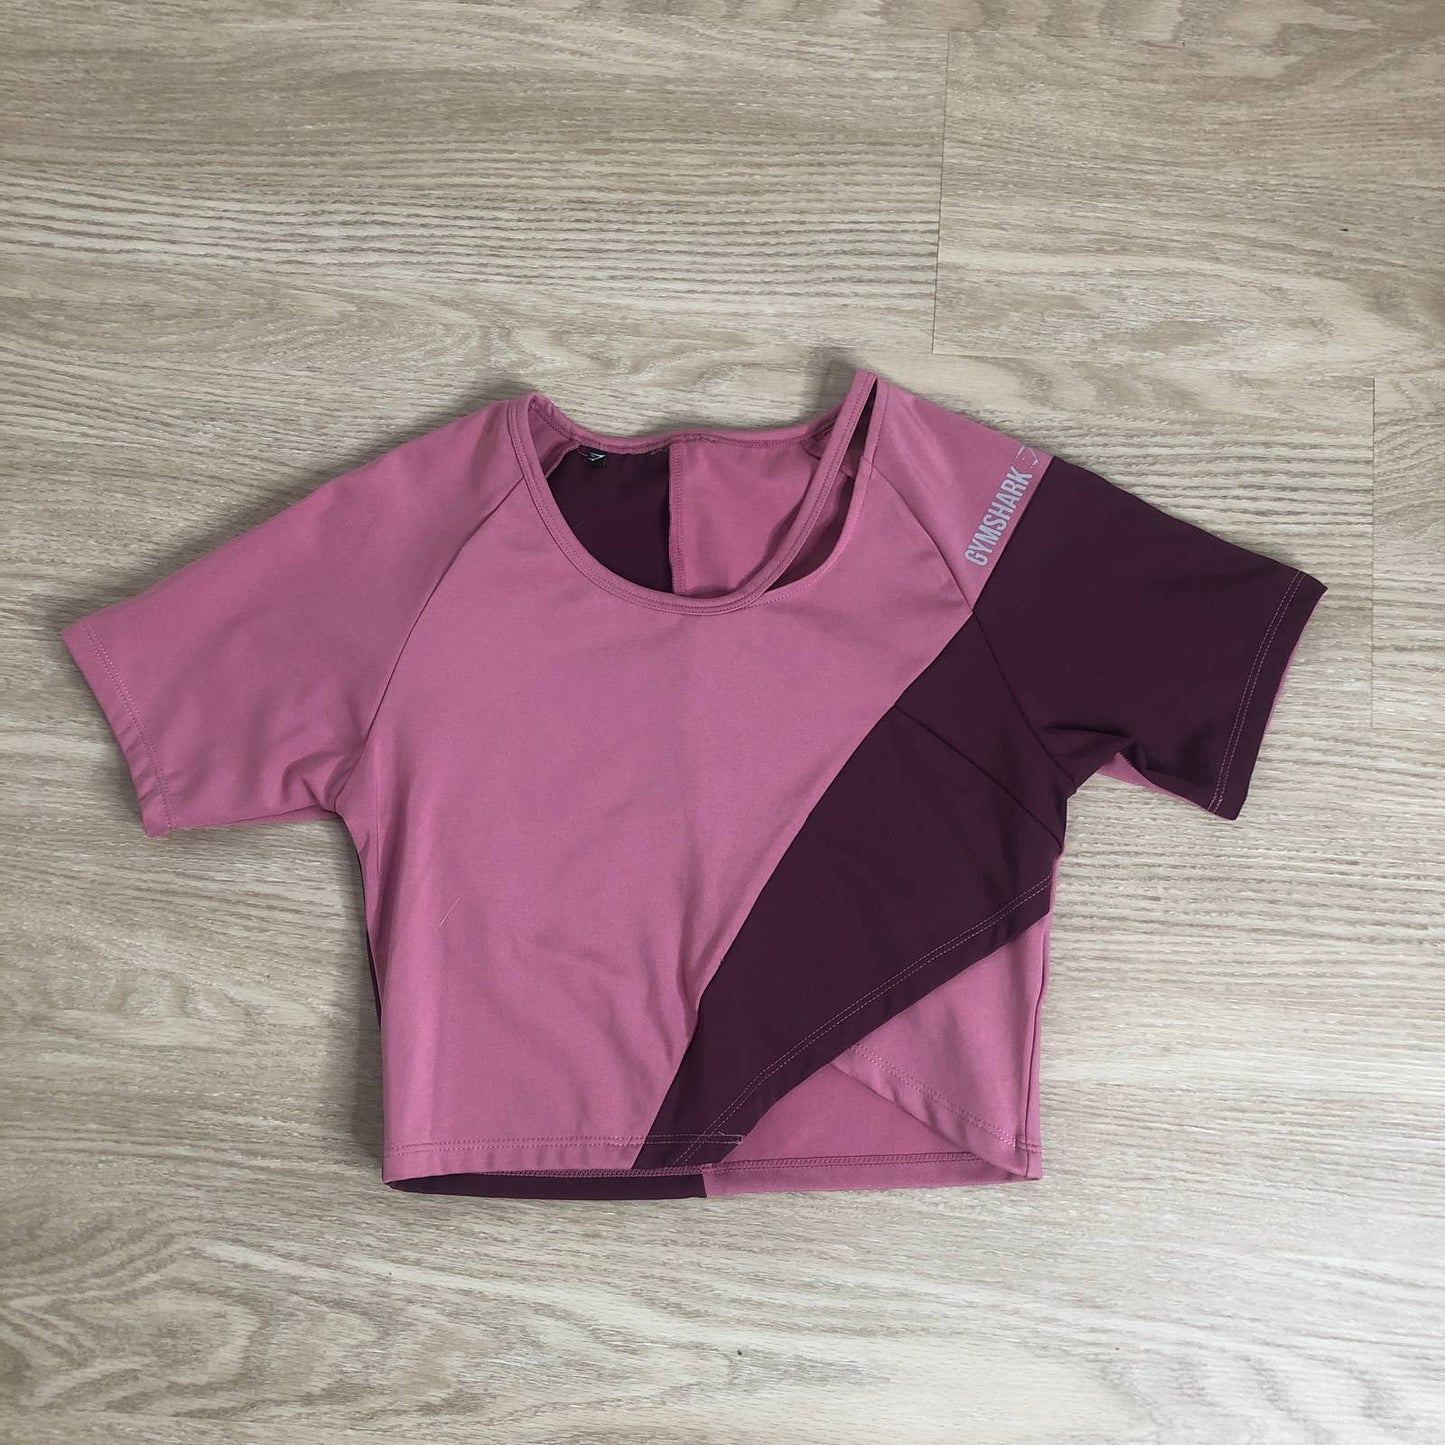 Gymshark asymmetric pink cropped color block top